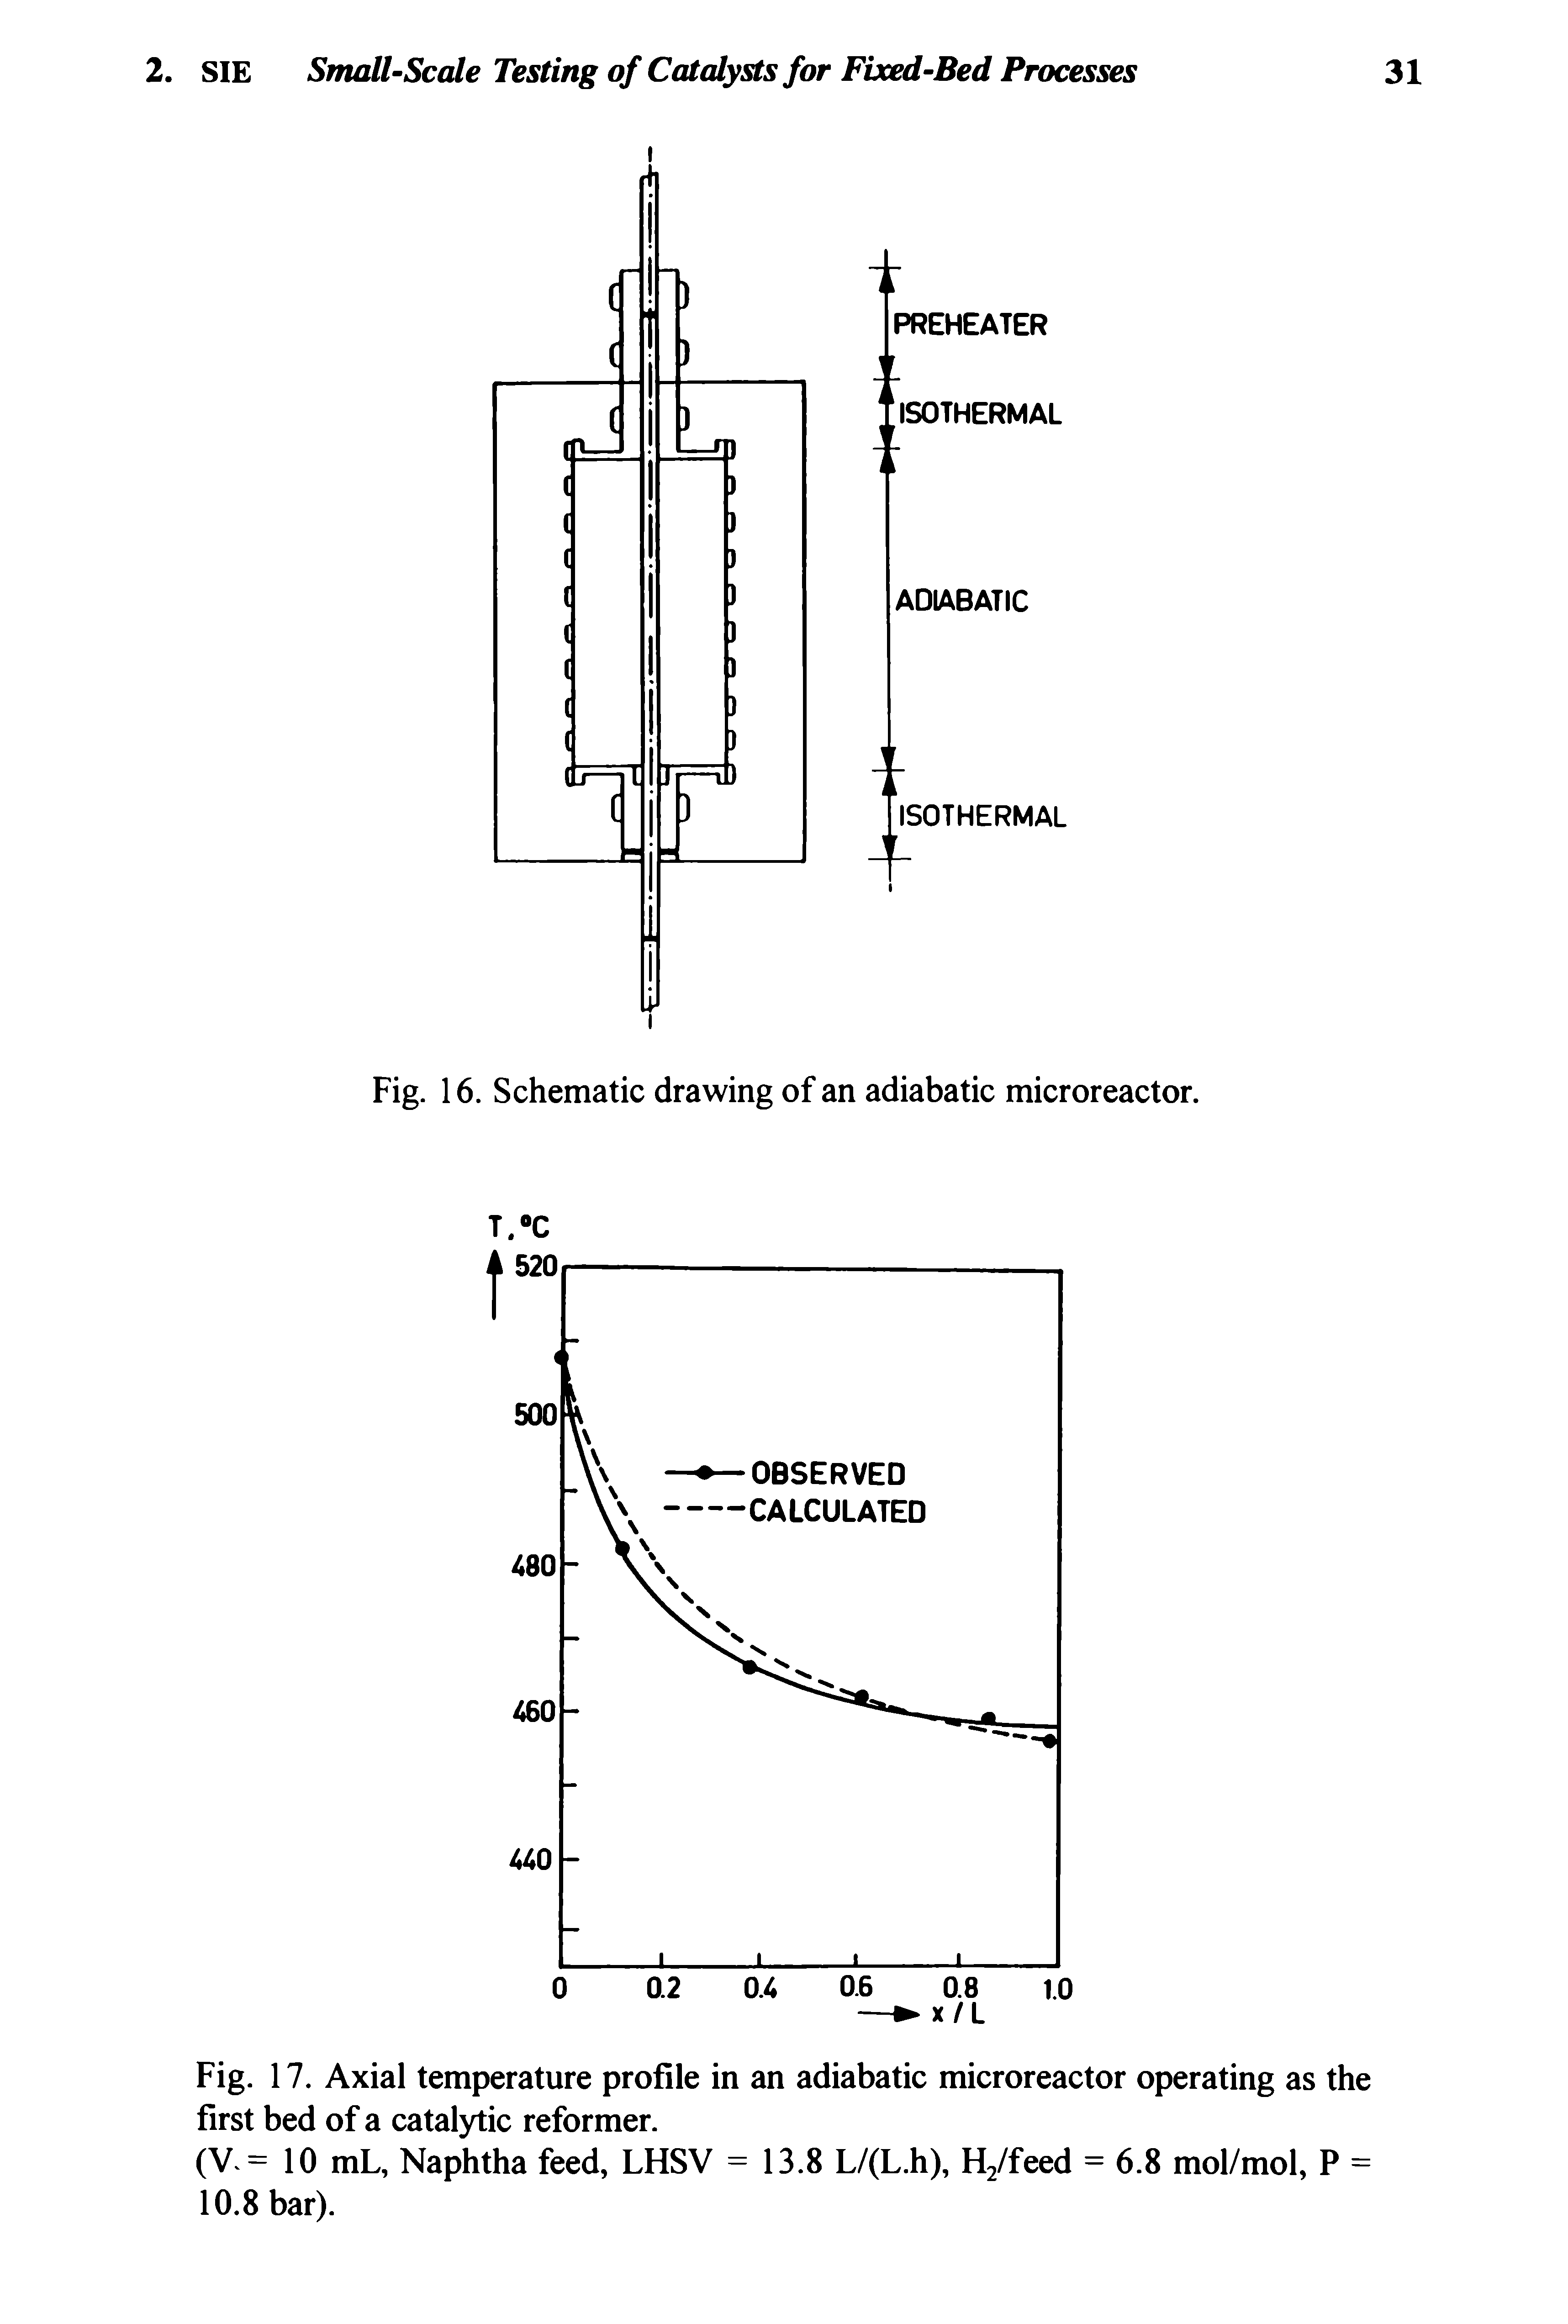 Fig. 17. Axial temperature profile in an adiabatic microreactor operating as the first bed of a catalytic reformer.